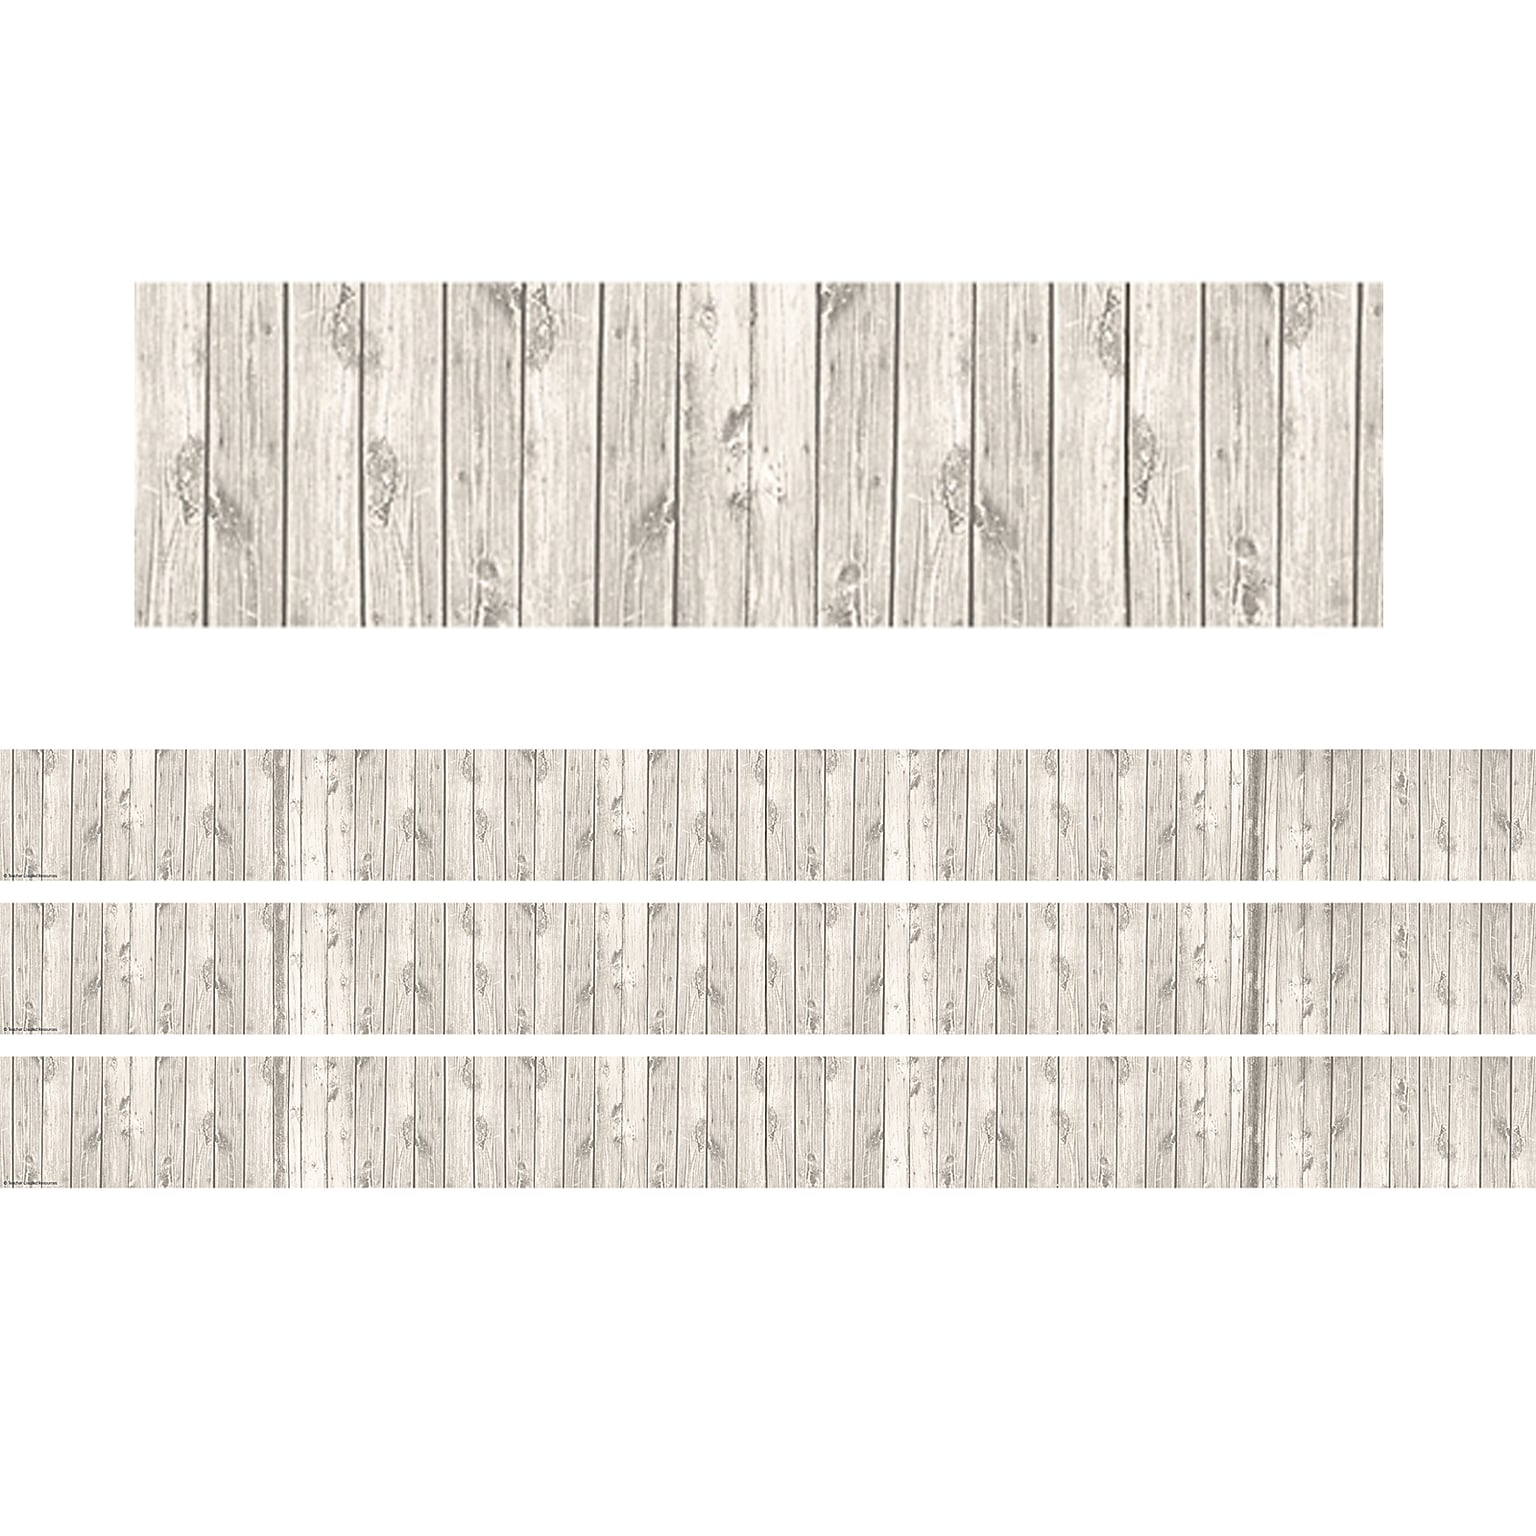 Teacher Created Resources Rolled Straight Border, 3 x 150, White Wood Design (TCR8949-3)